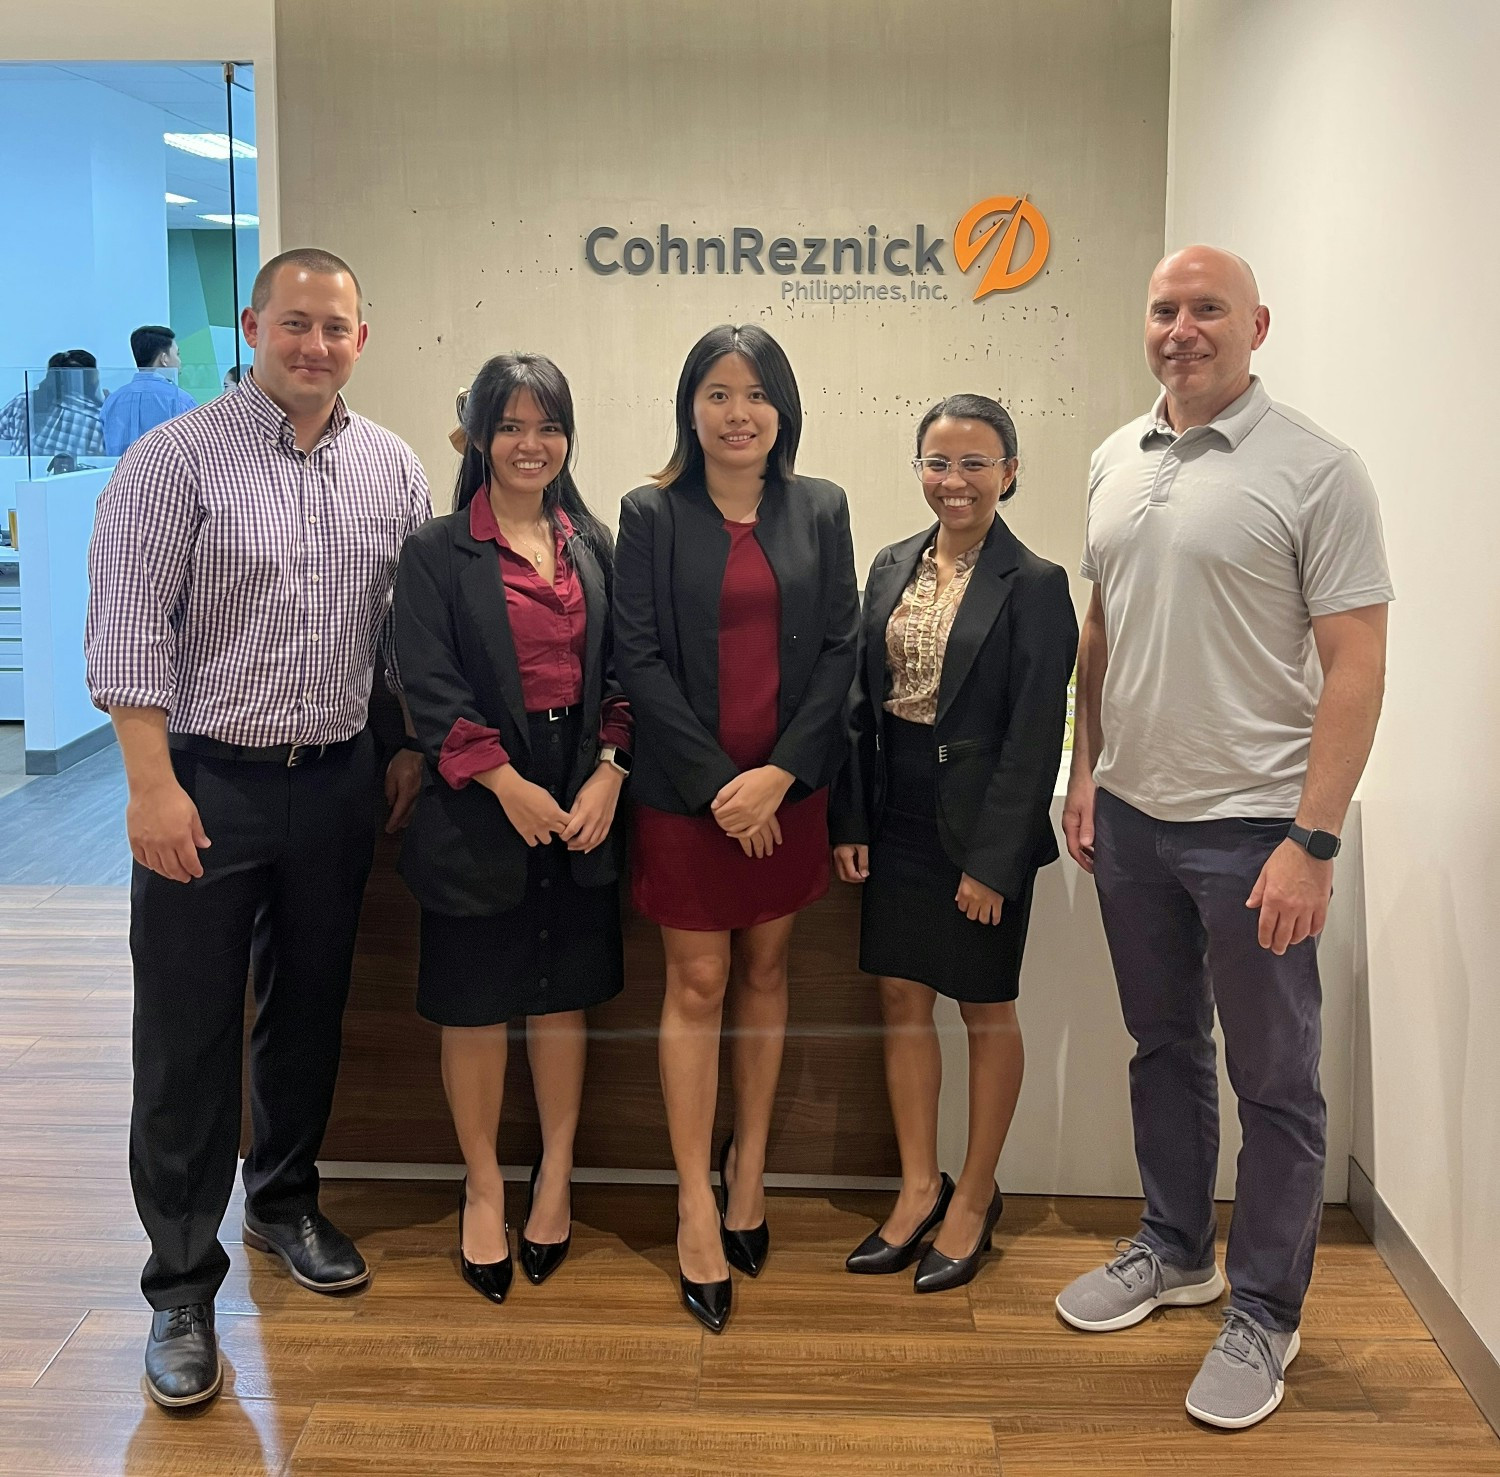 Our leaders visiting CohnReznick Philippines